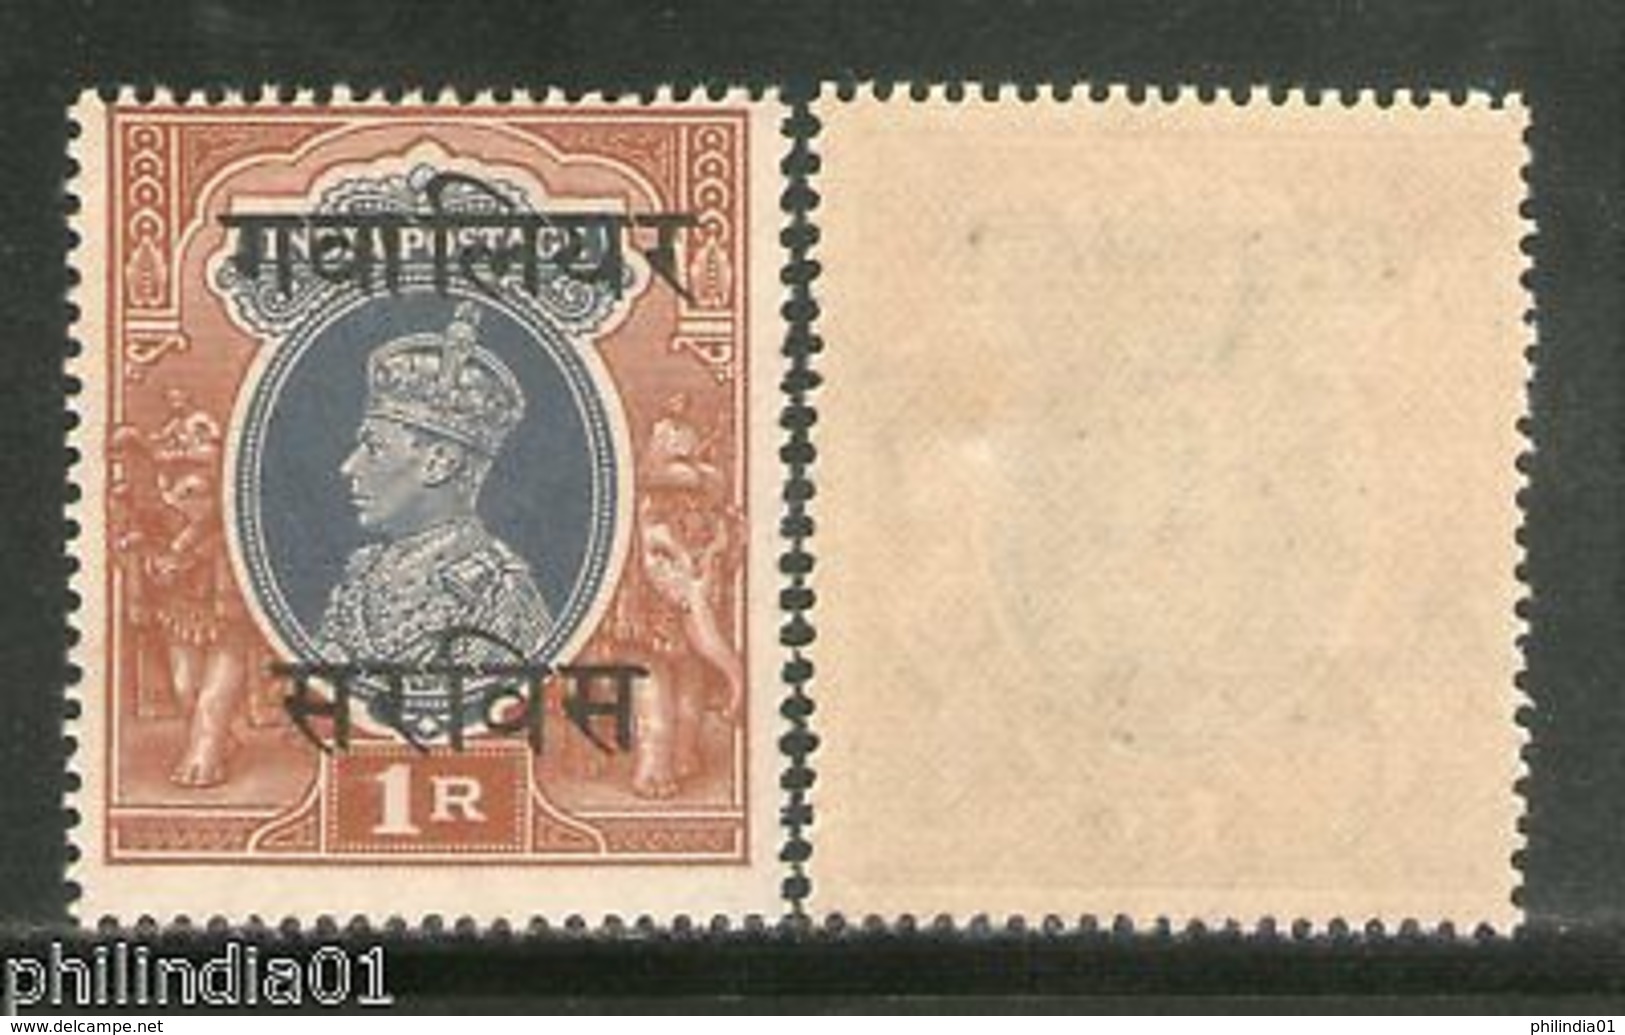 India Gwalior State 1Re KG VI Service Stamp SG O91 / O48 Cat $13 MNH - Gwalior